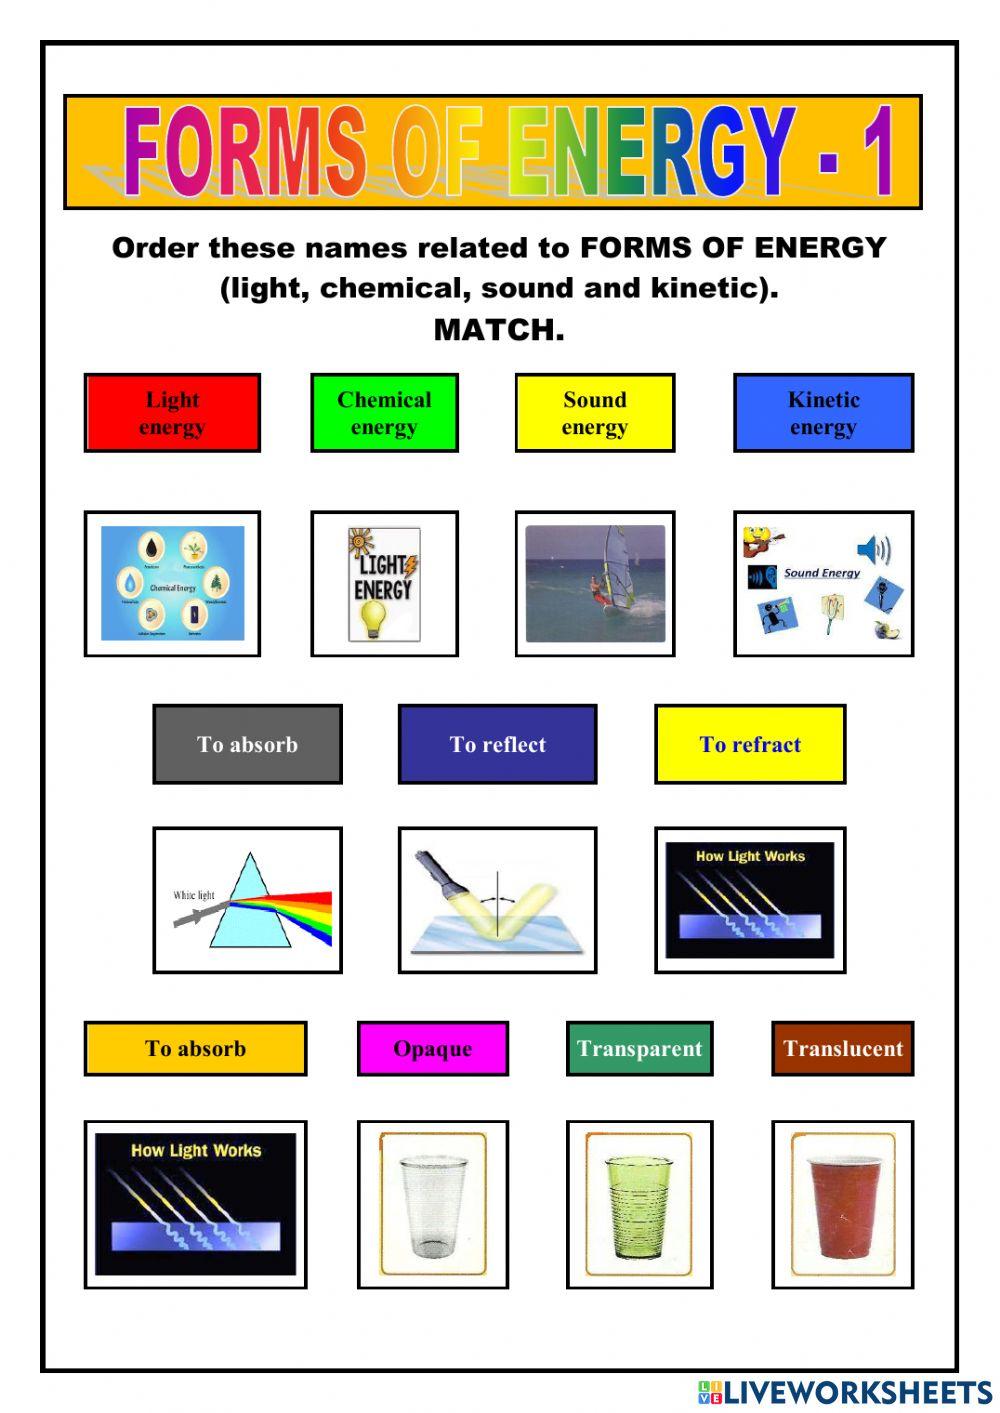 Energy: forms of energy 1